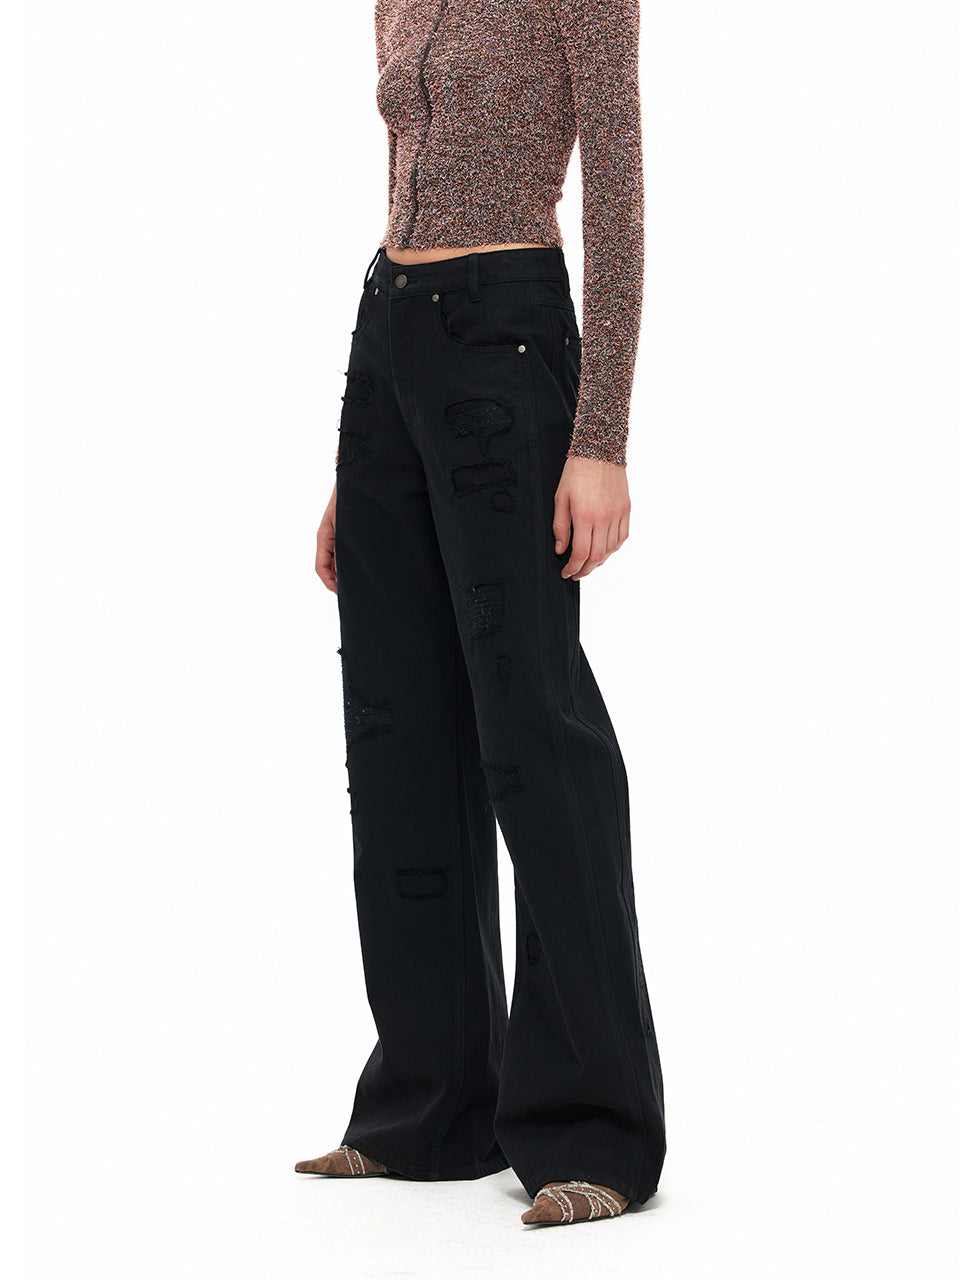 NUHT “Unbreakable Hole” Black Patched Flared Jeans